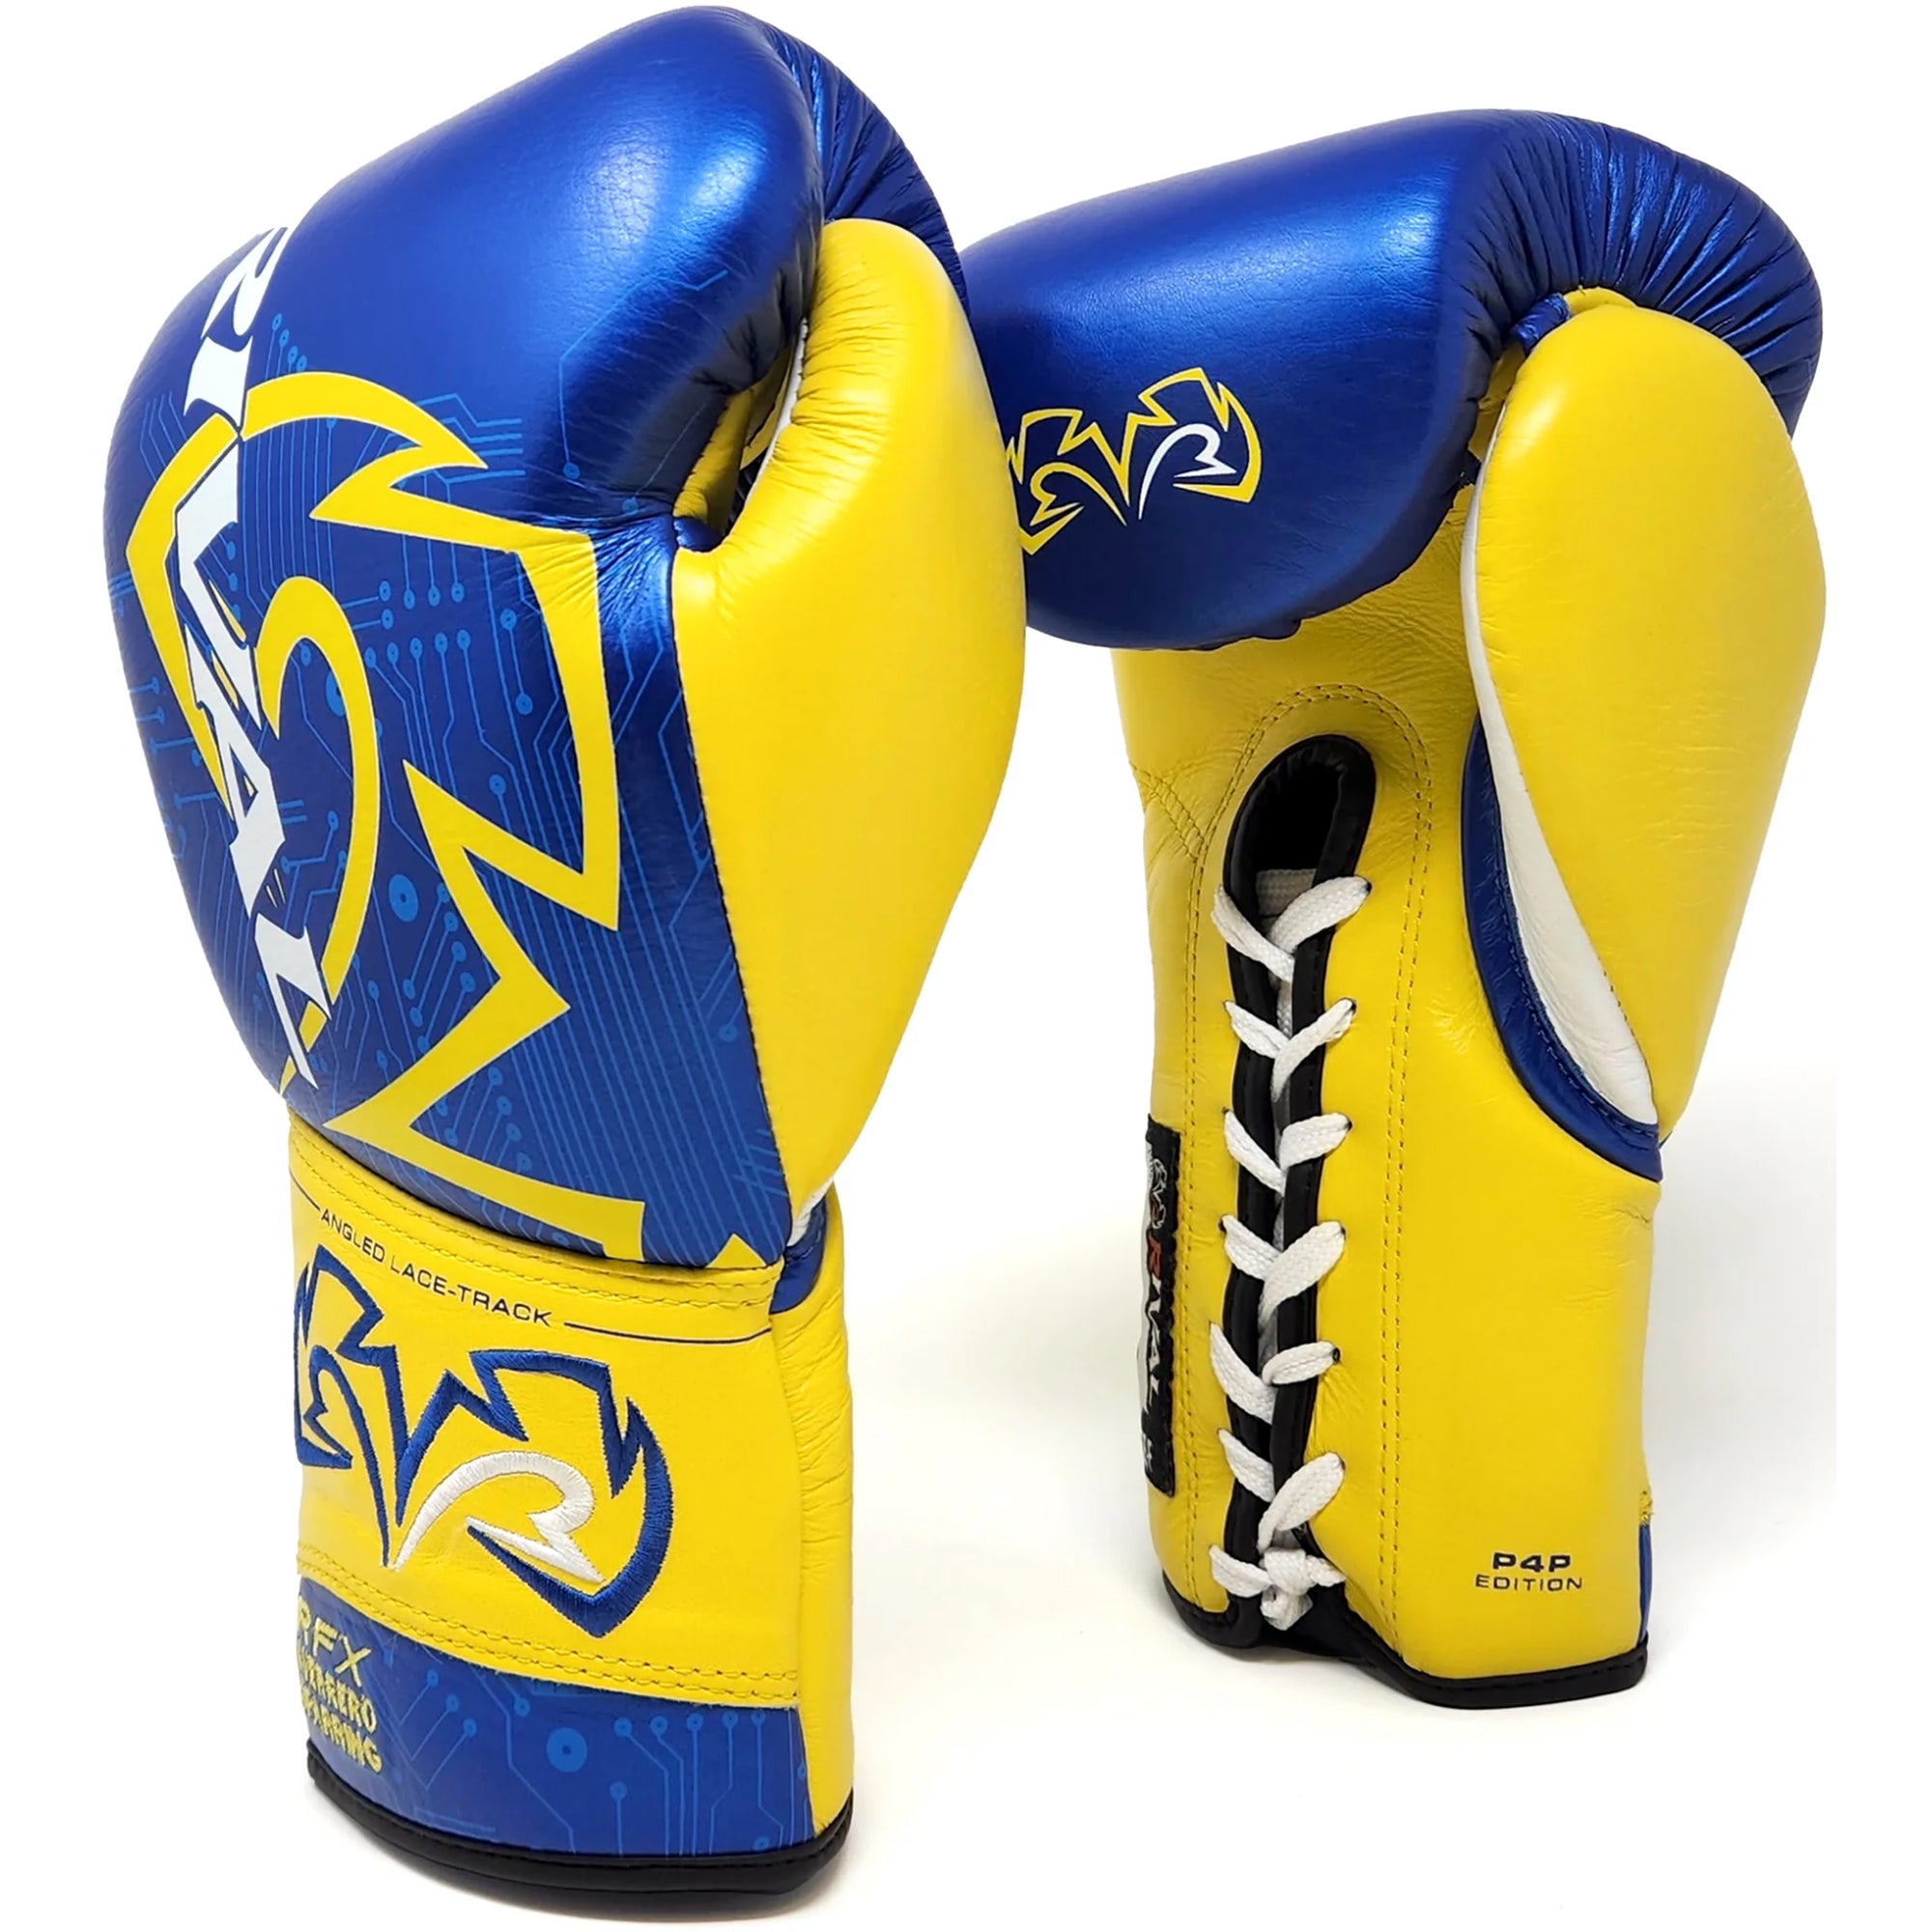 Rival Boxing RFX-Guerrero Sparring Gloves P4P Edition - 12 oz. - Blue/Yellow RIVAL